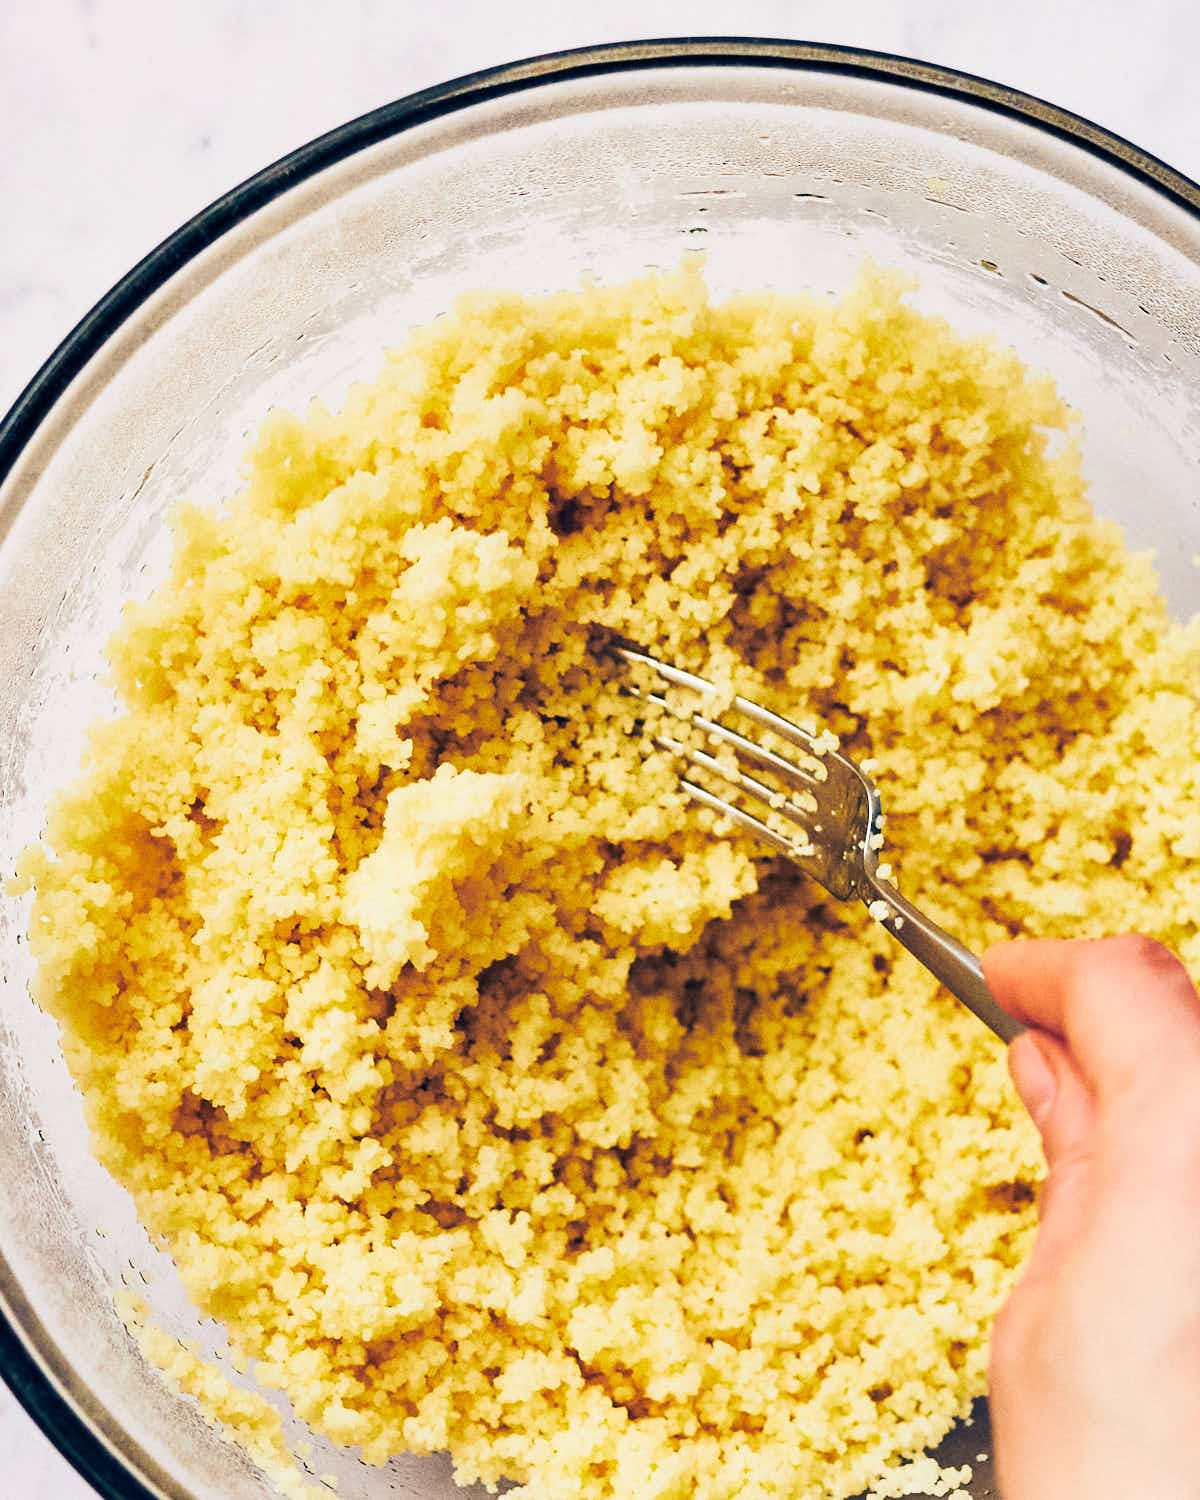 A fork fluffy steamed couscous in a bowl for Halloumi Couscous Salad with Lemon.